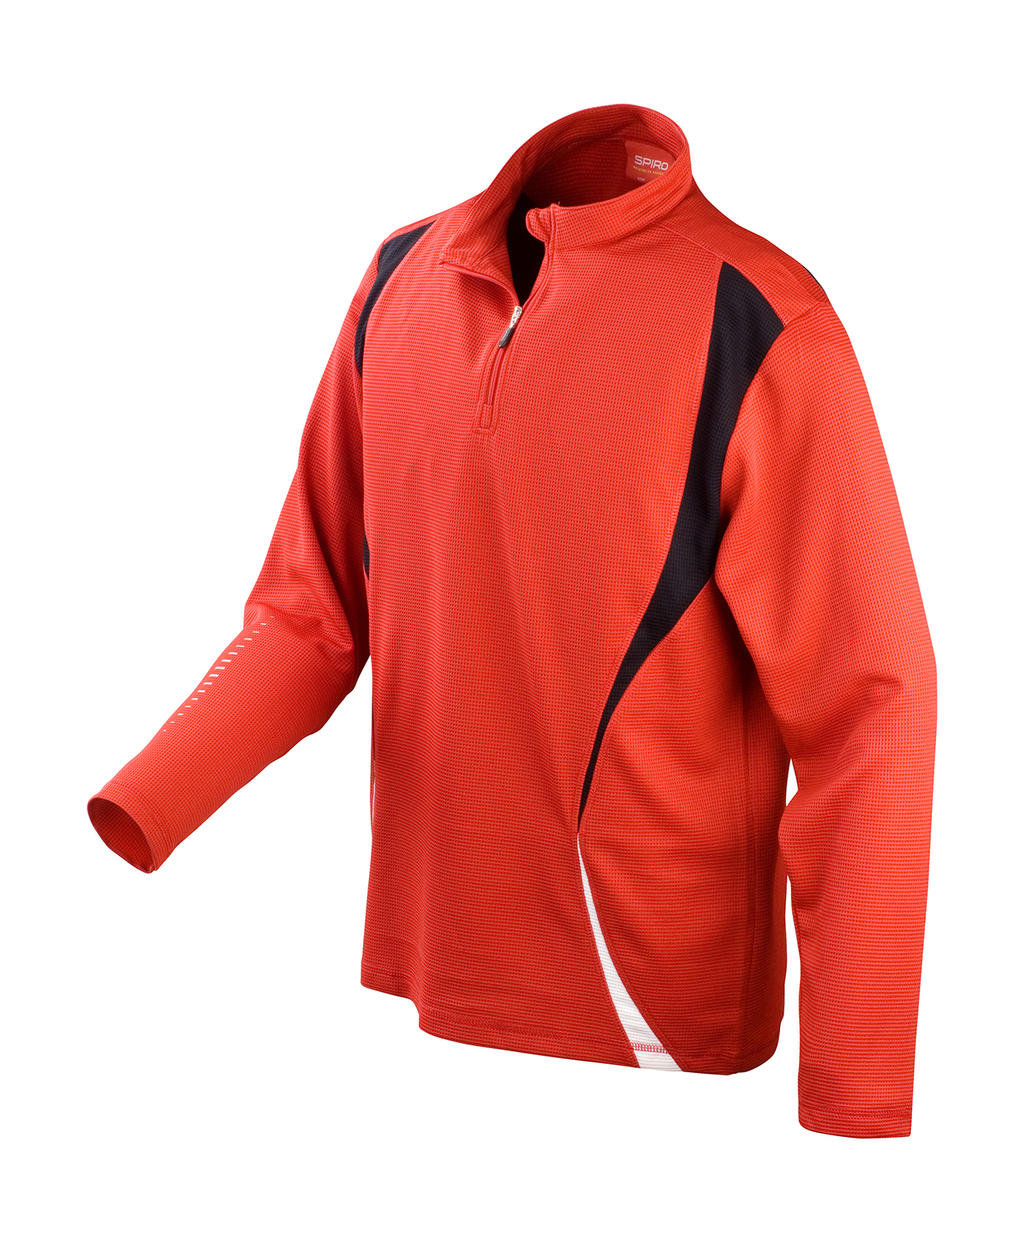  Spiro Trial Training Top in Farbe Red/Black/White